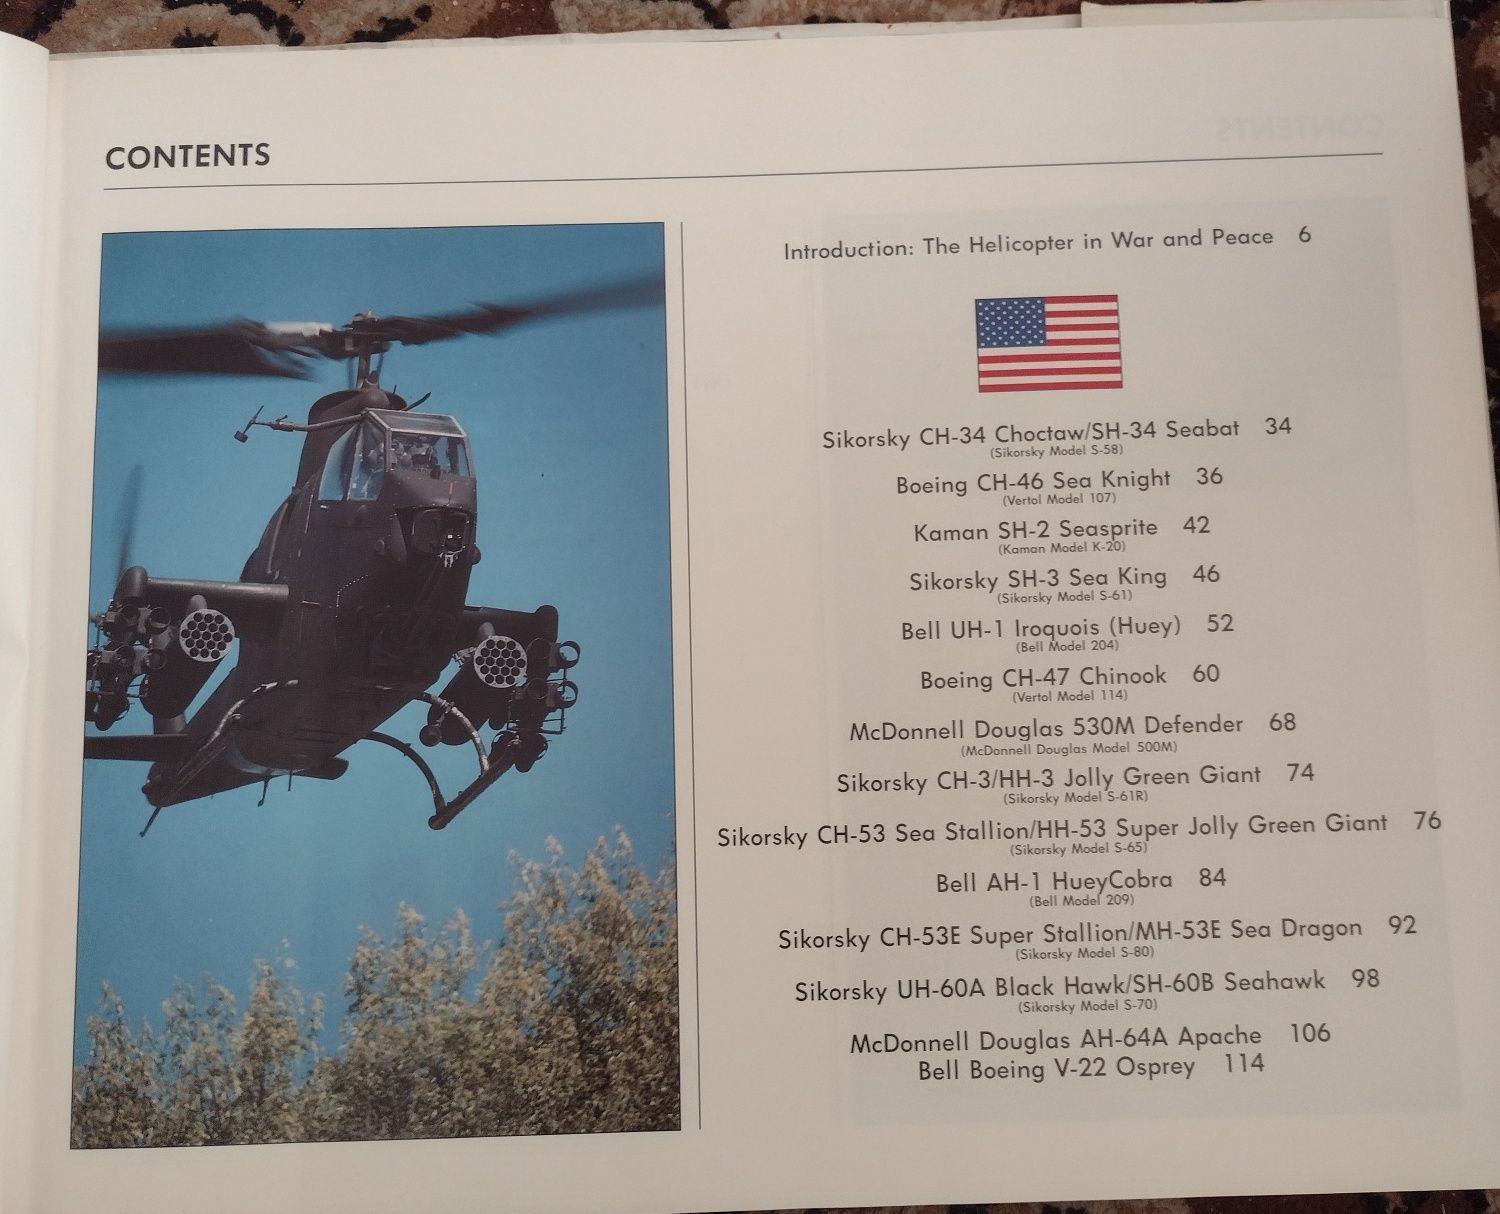 The illustrated history of Helicopters